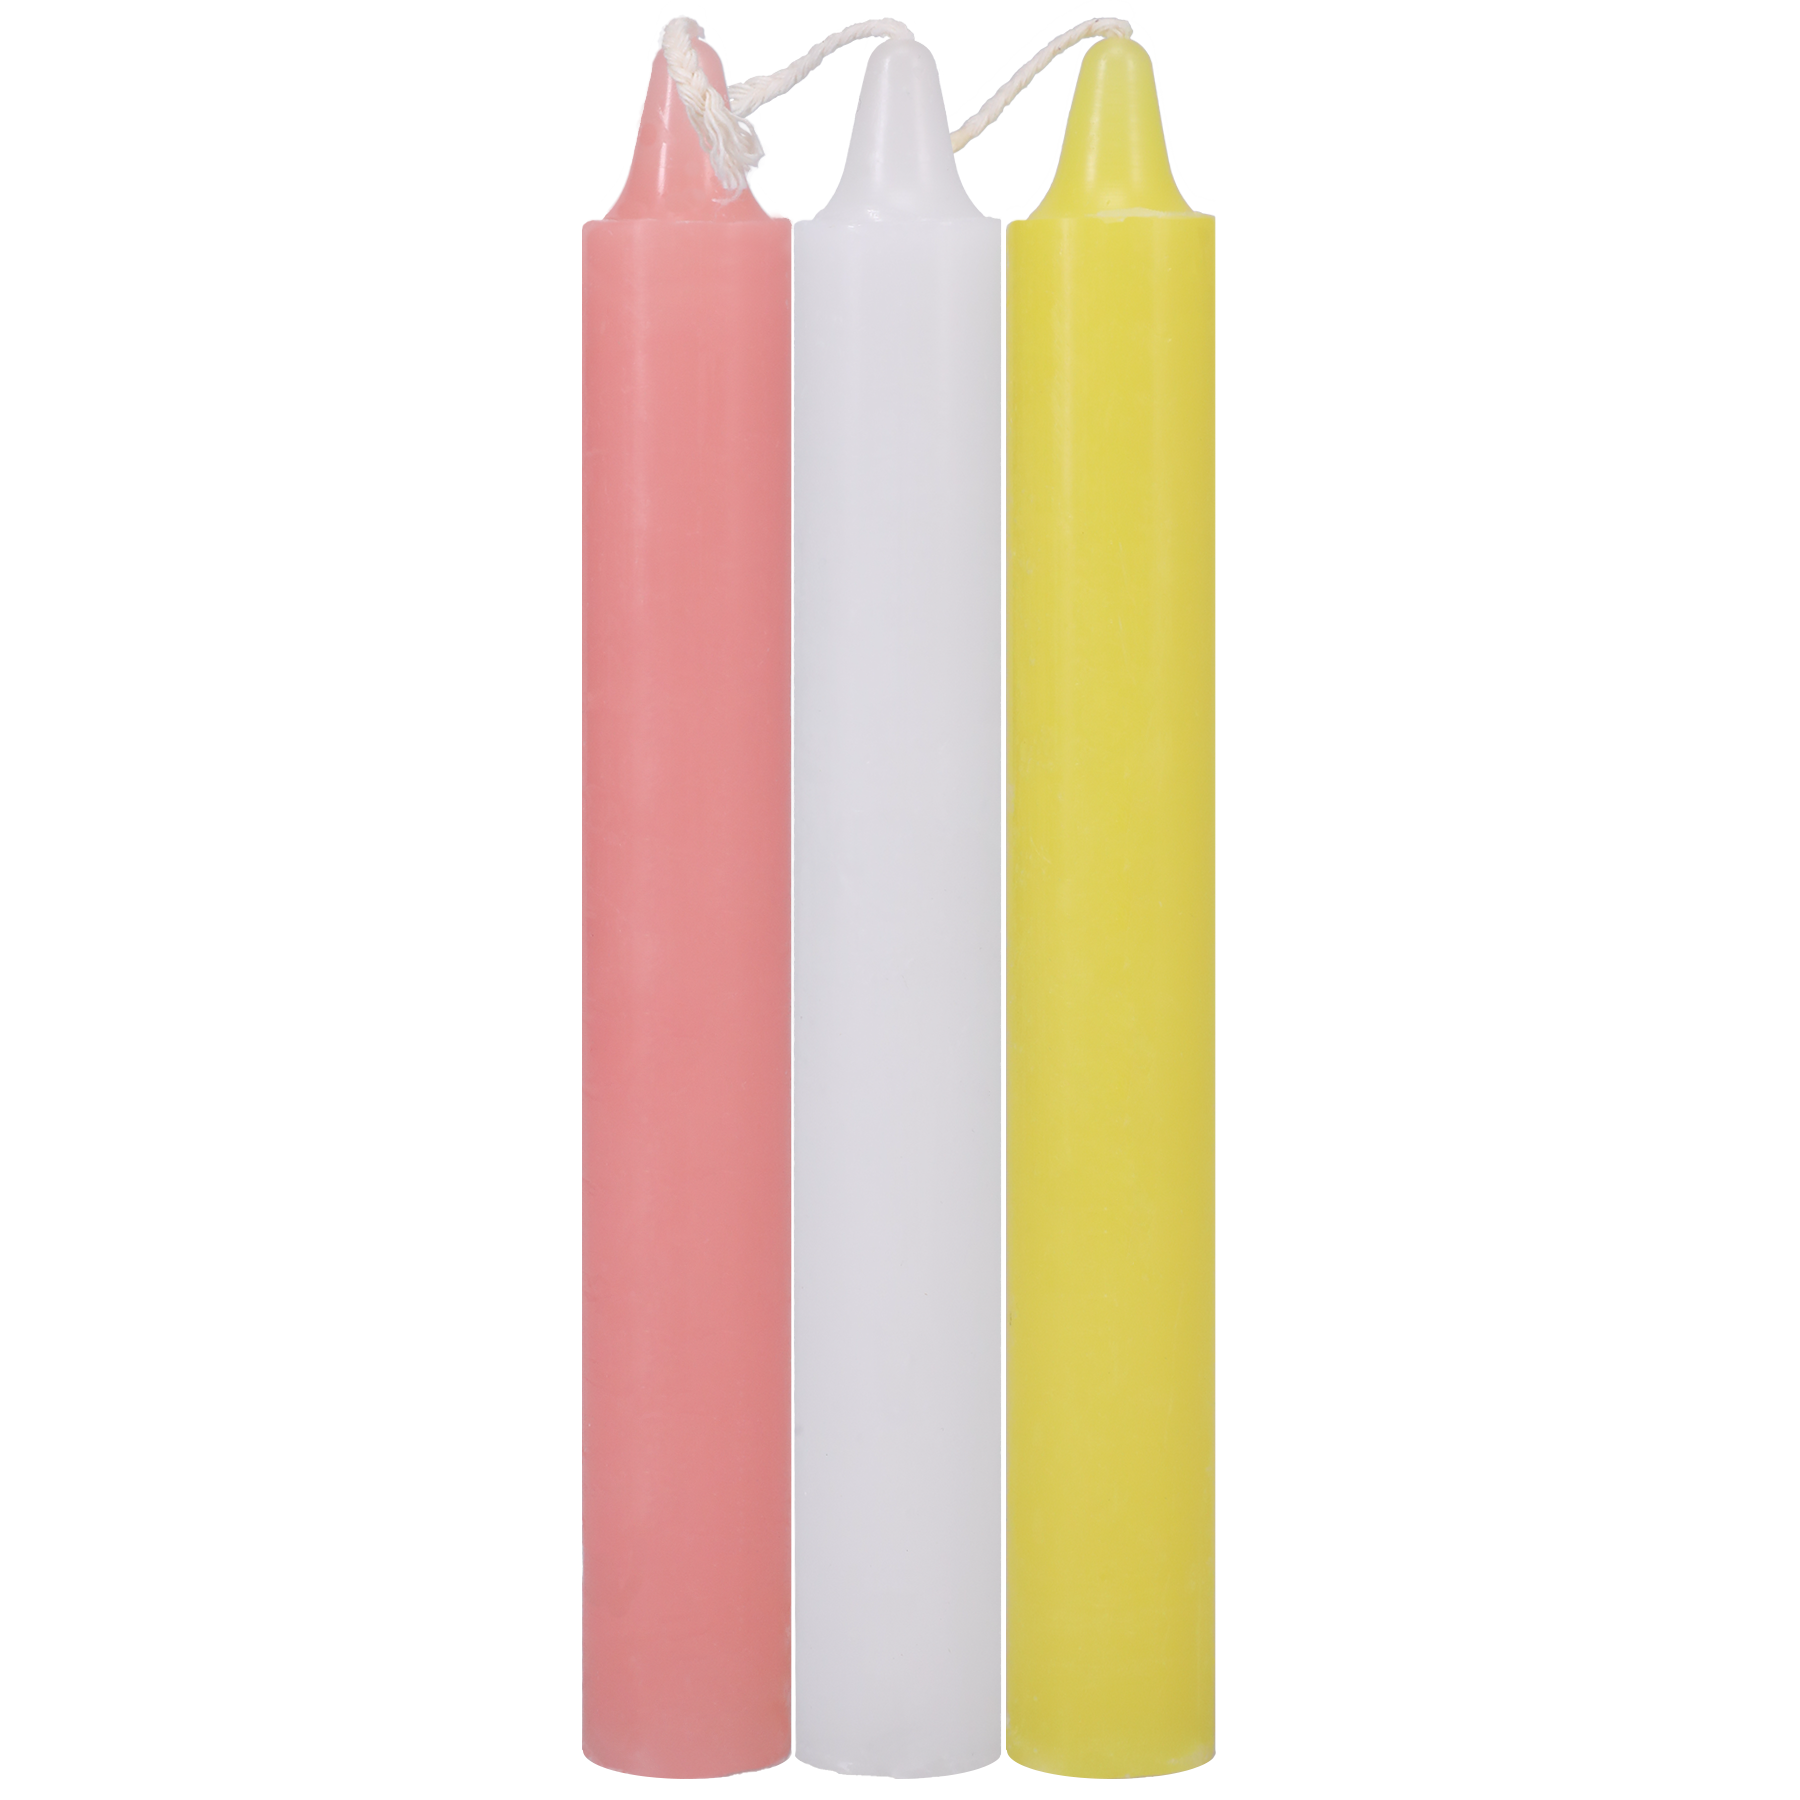 Japanese Drip Candles - 3 Pack Multi-Colored - Thorn & Feather